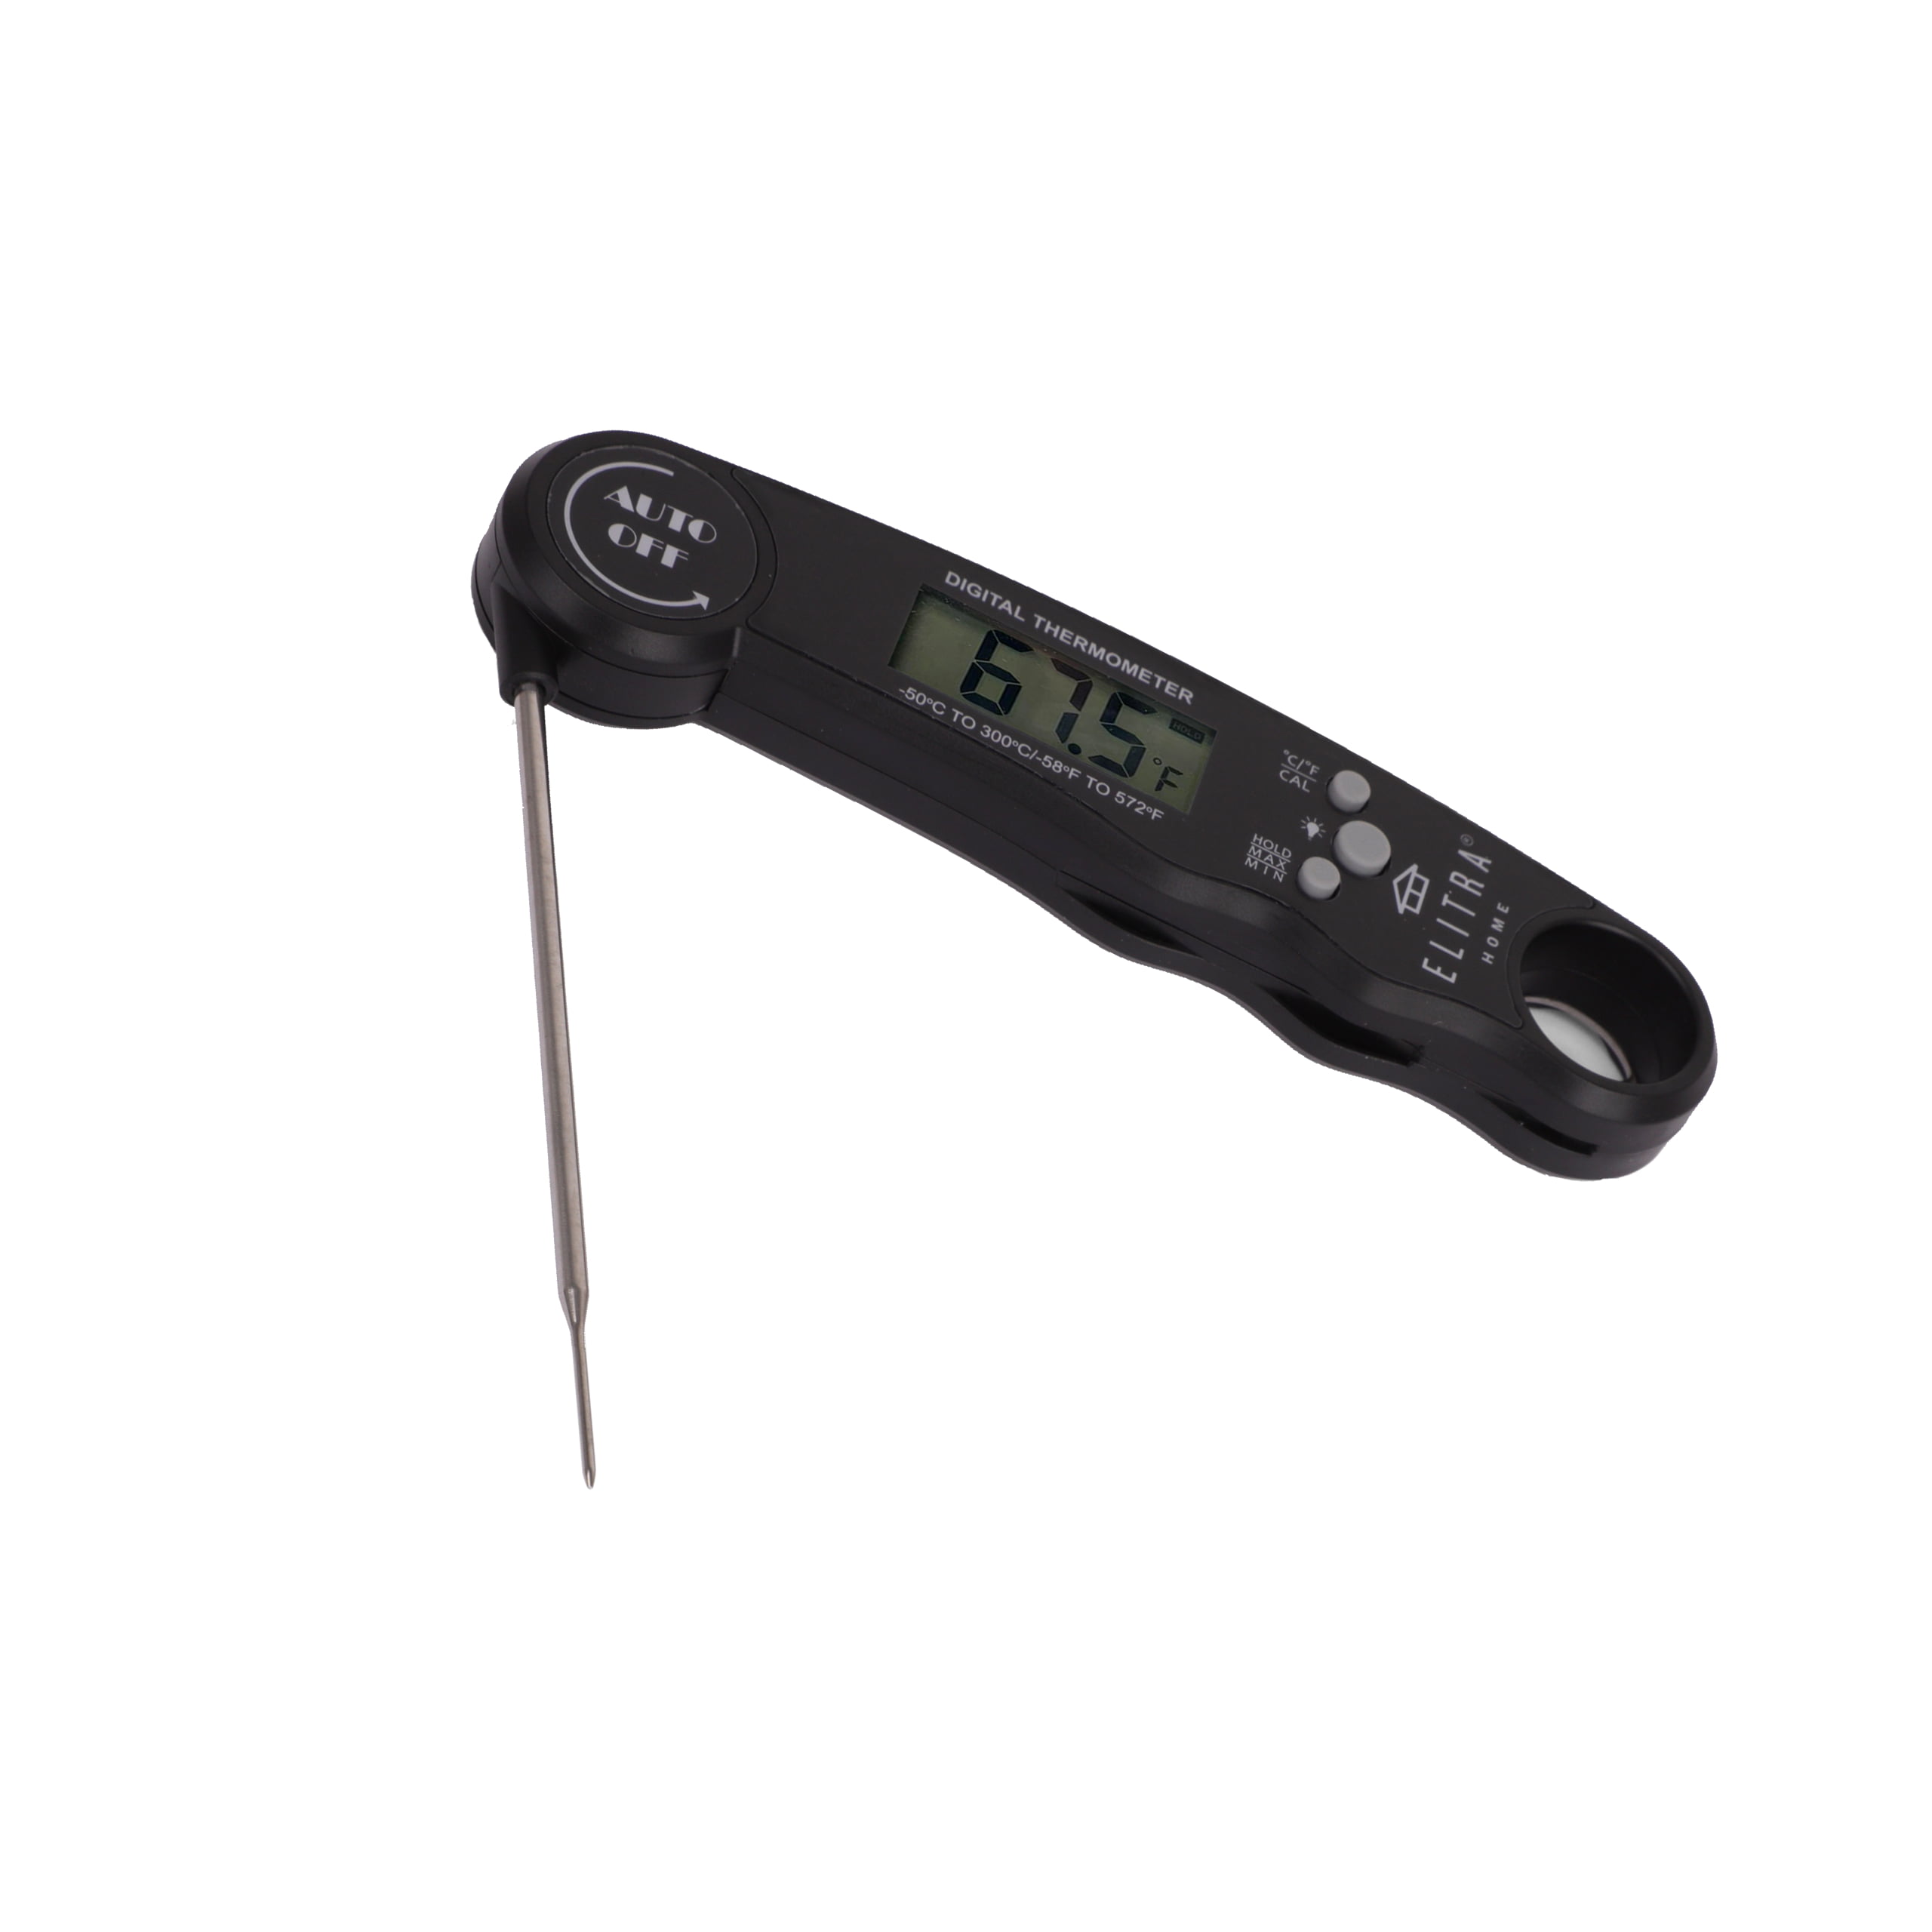 Harlyn FT450 Instant-Read Digital Meat/Food Thermometer - Digital